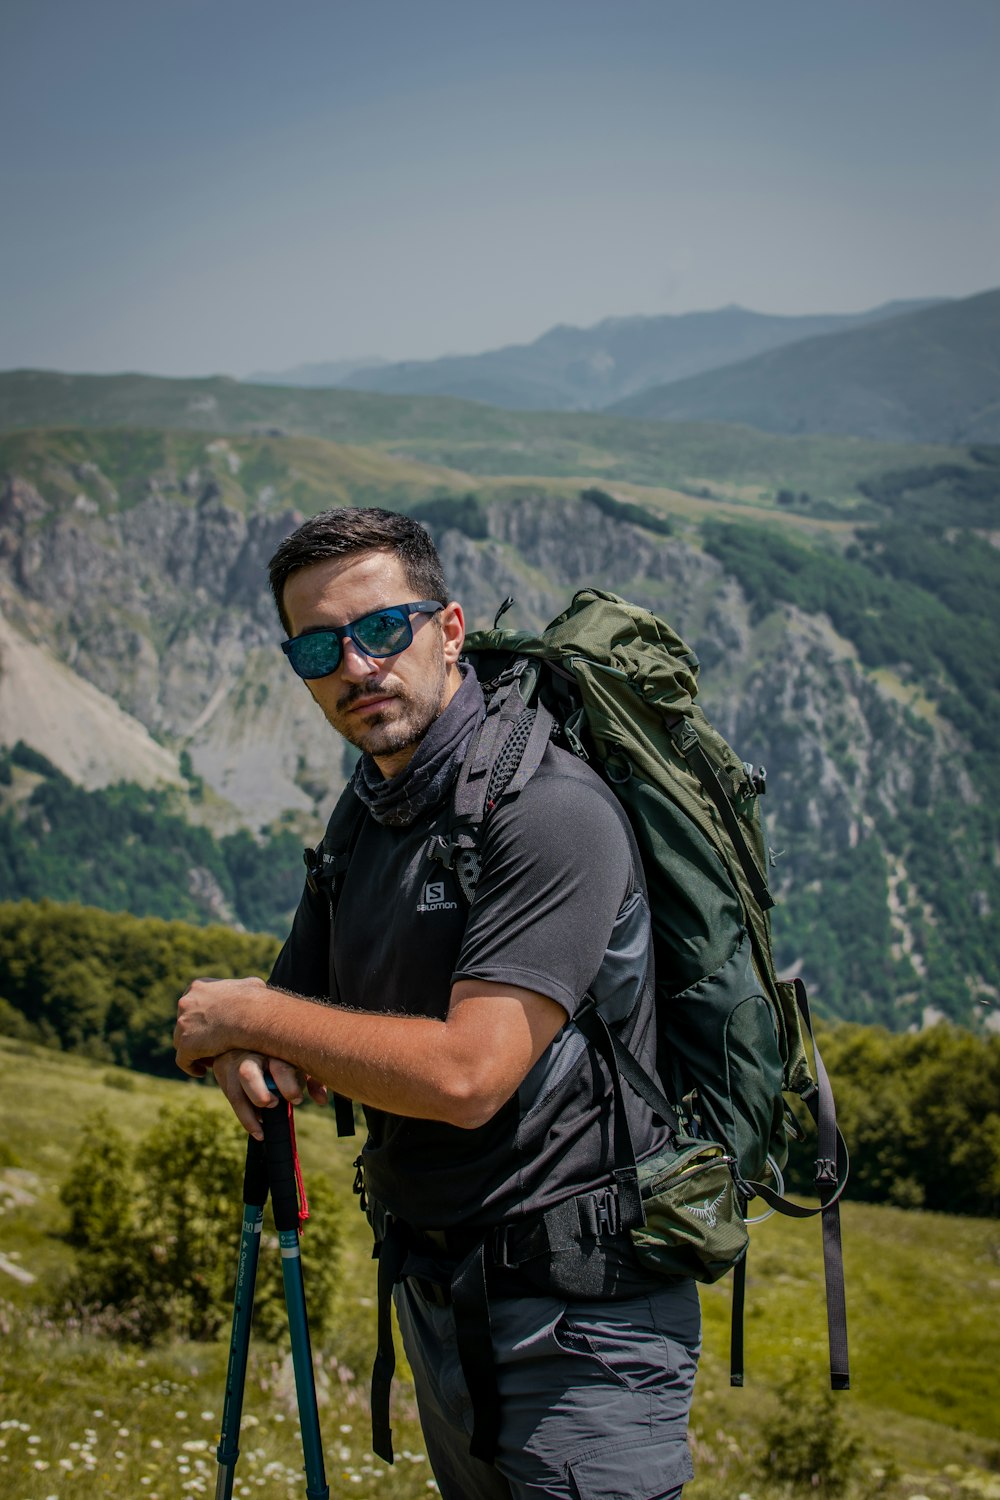 man in black t-shirt wearing black sunglasses and backpack standing on mountain during daytime